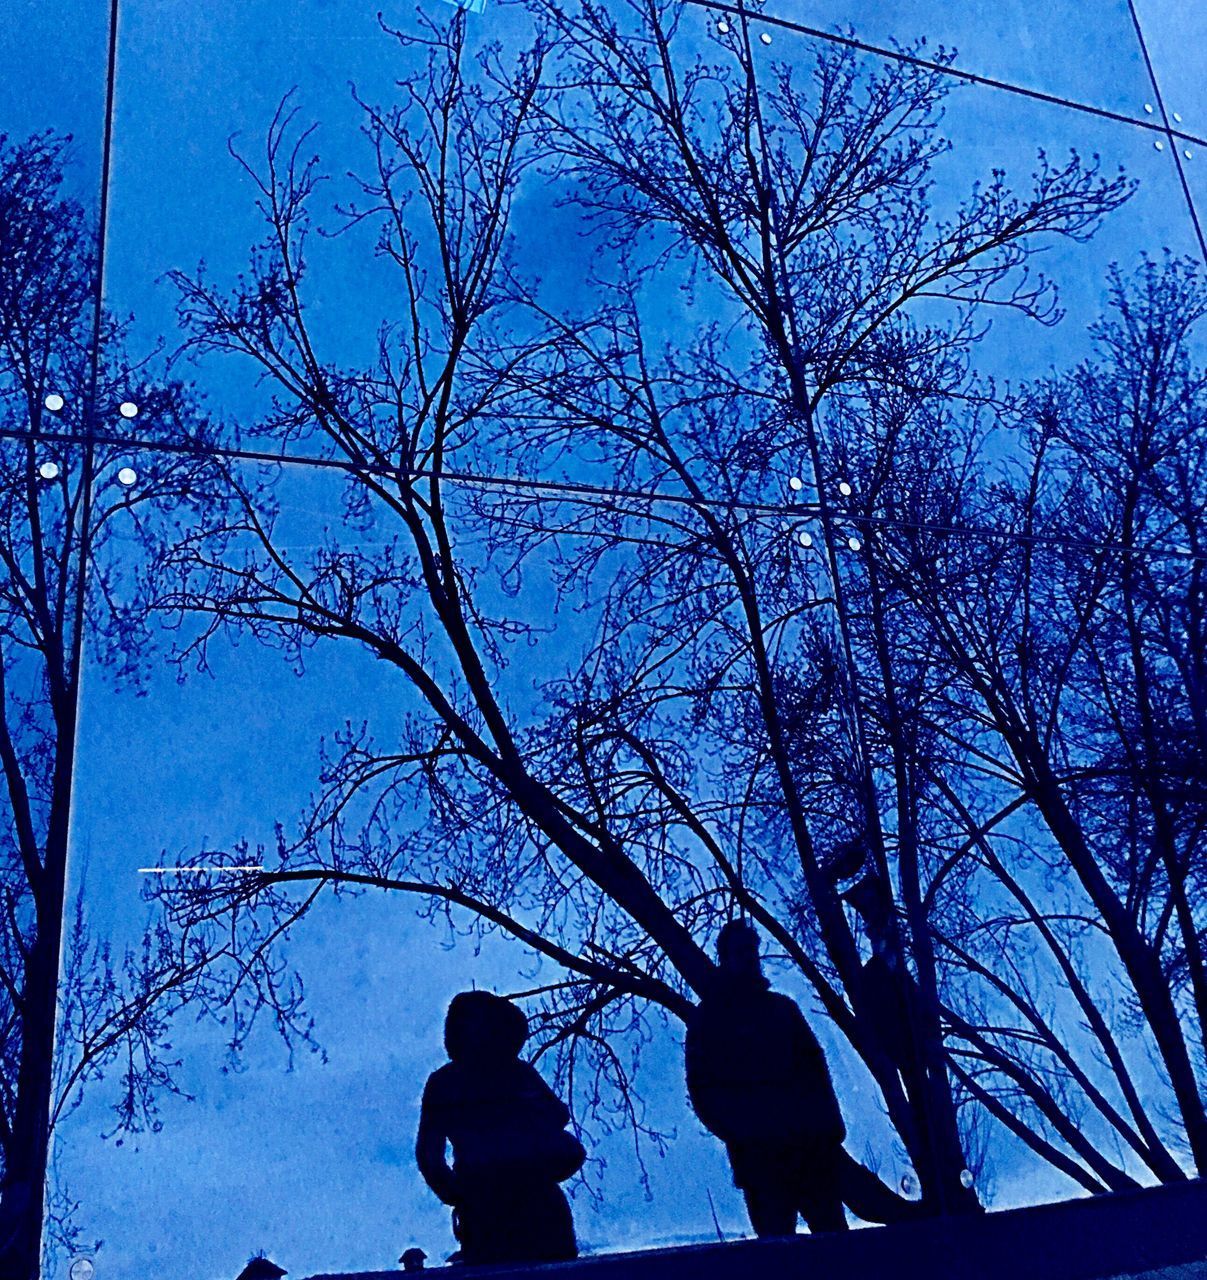 SILHOUETTE PEOPLE BY BARE TREE AGAINST SKY